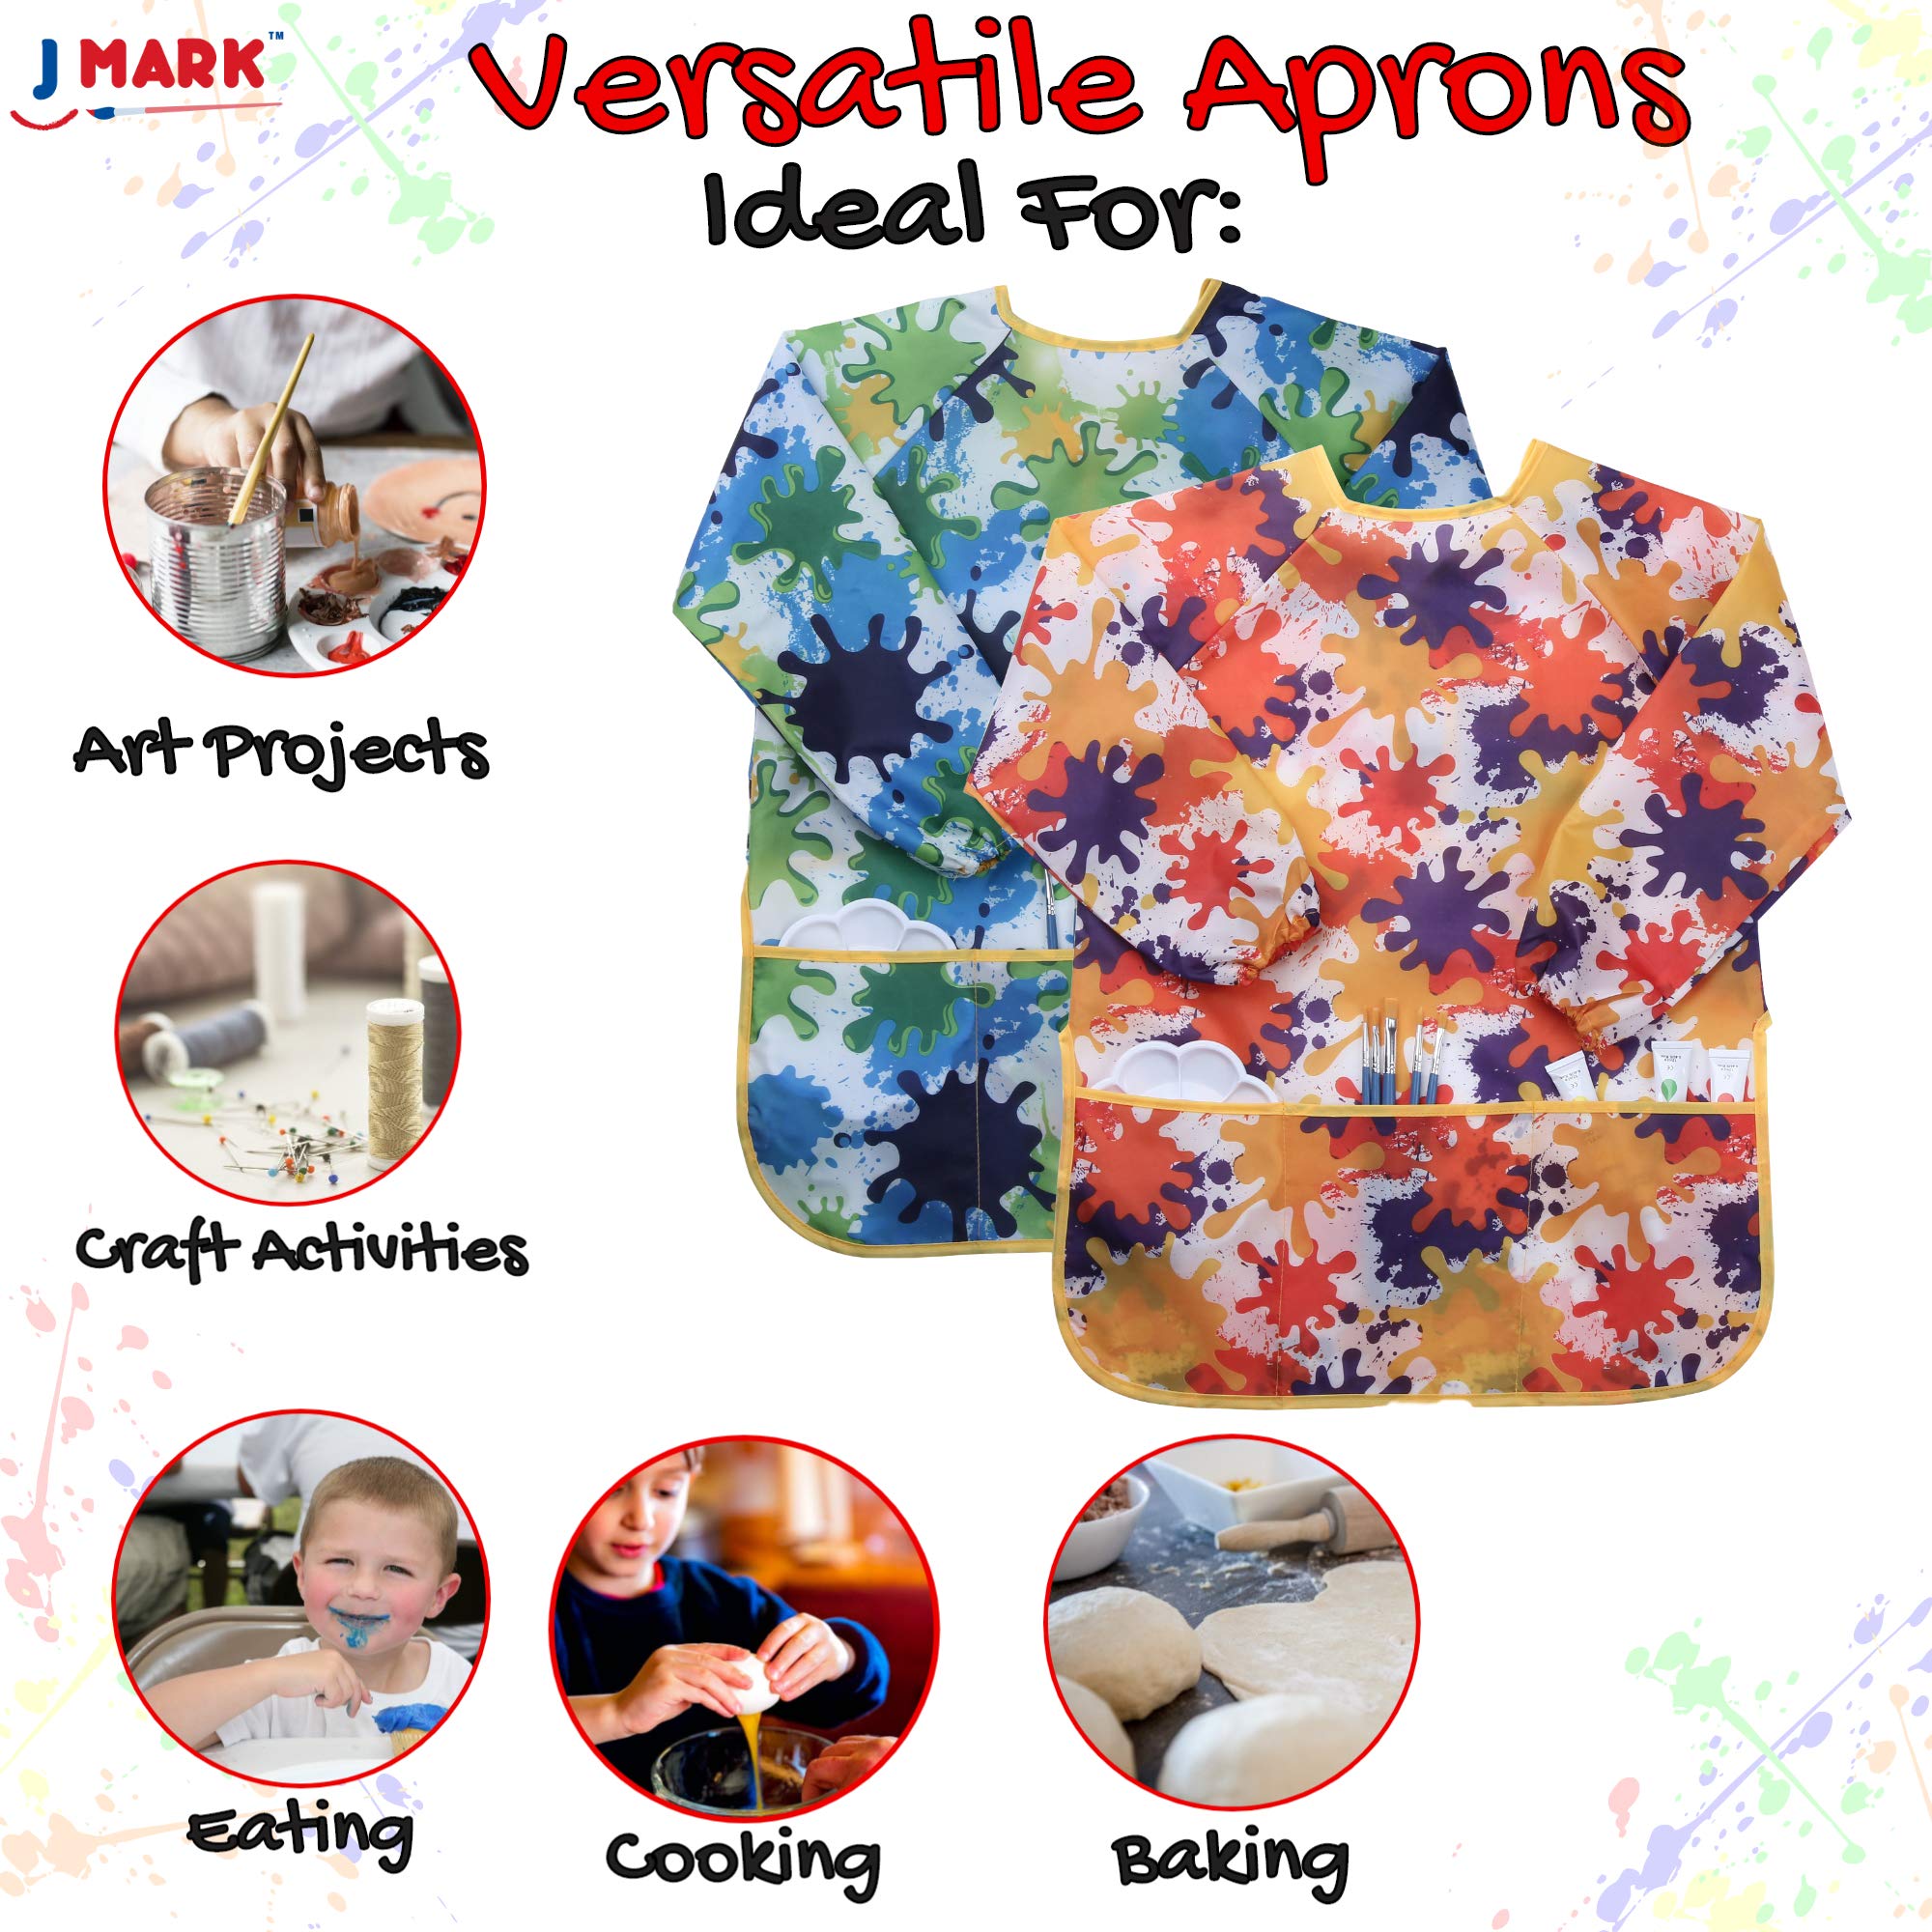 Kids Art Smock Painting Apron -(Pack of 2) Long Sleeve and 2 Pockets for Baking, Eating, Arts & Crafts-Waterproof Paint Shirt